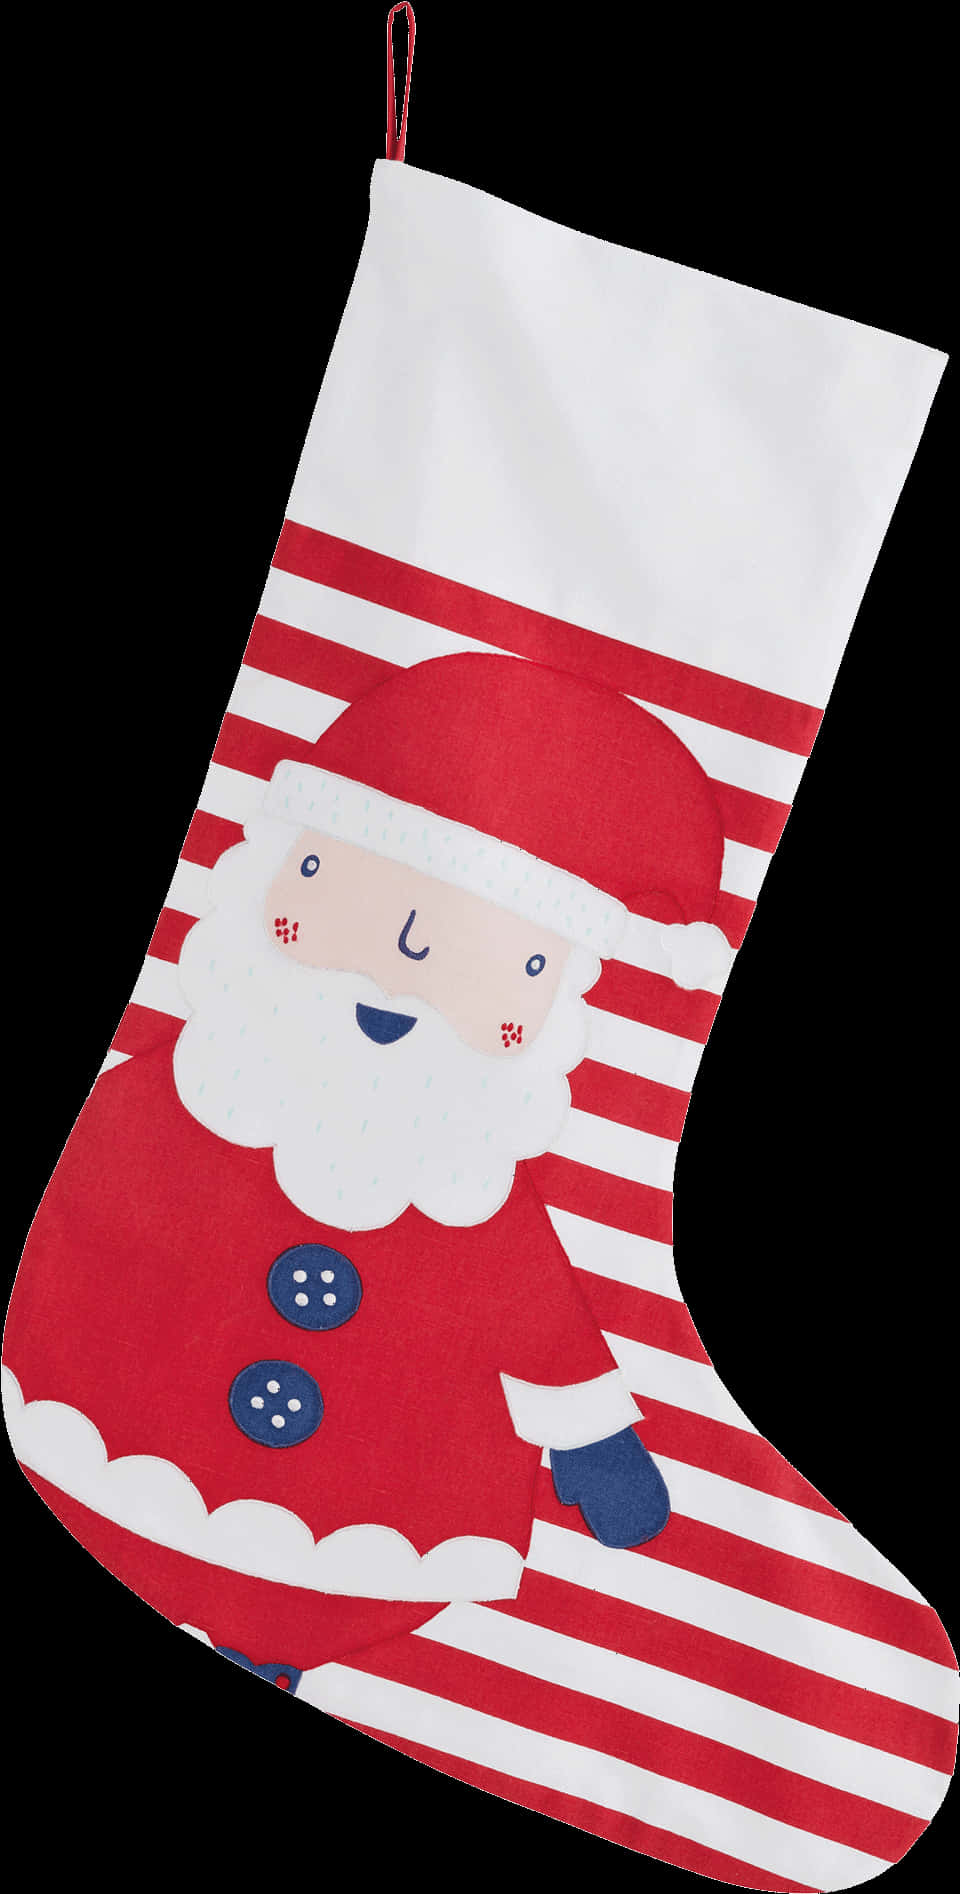 A Red And White Striped Stocking With A Cartoon Character